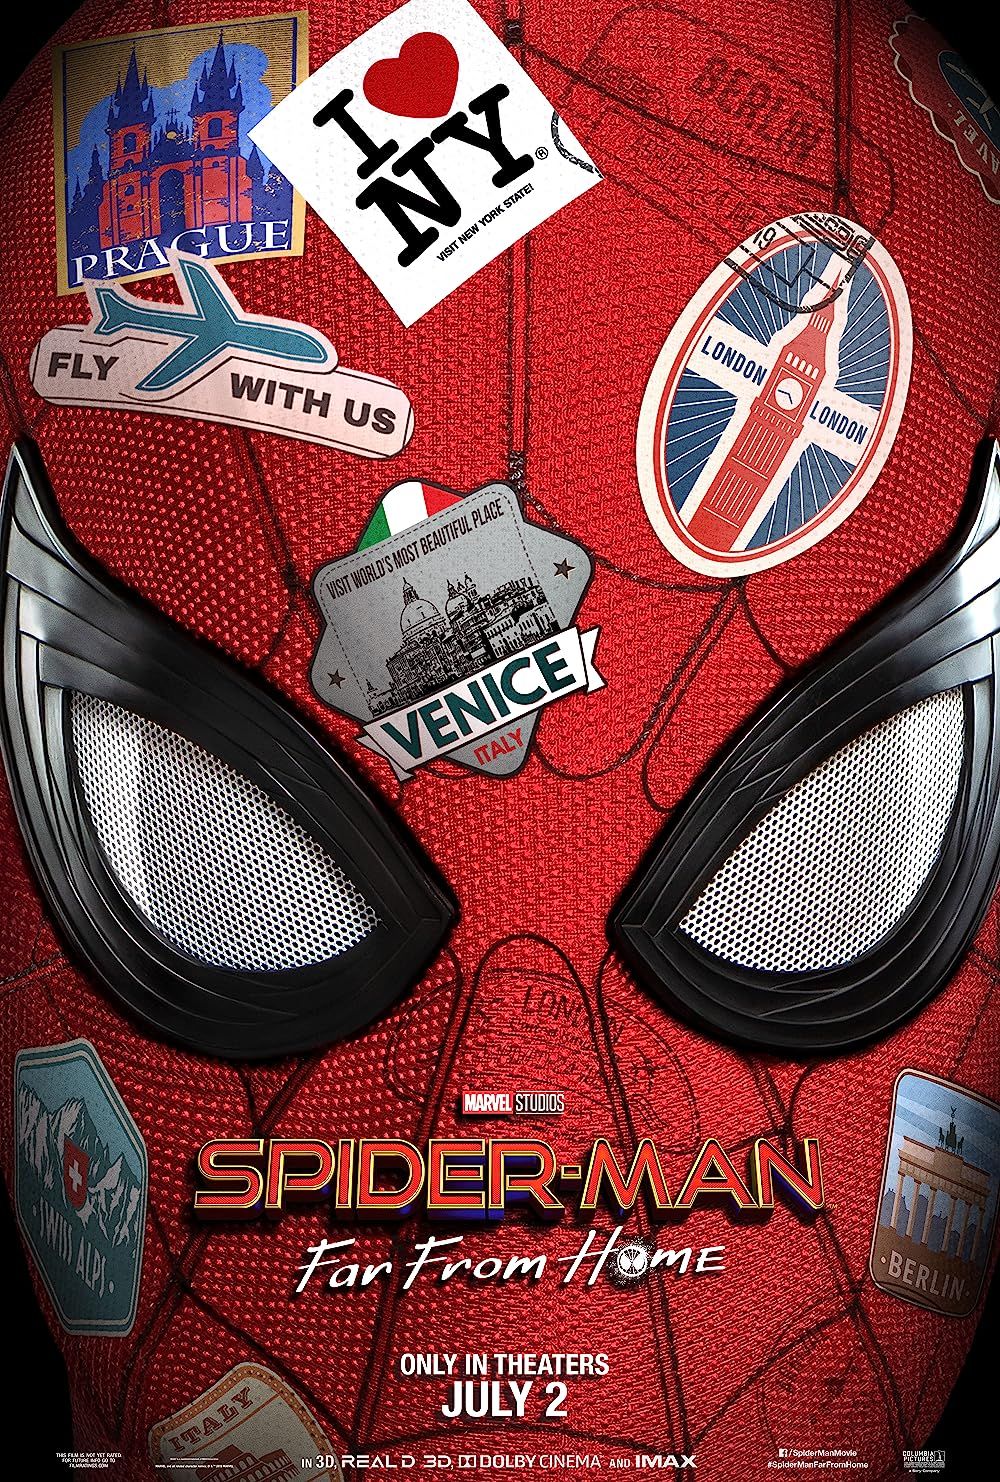 Spider-man's mask with travel stickers all over it in the Spider-Man- Far from Home Movie Poster